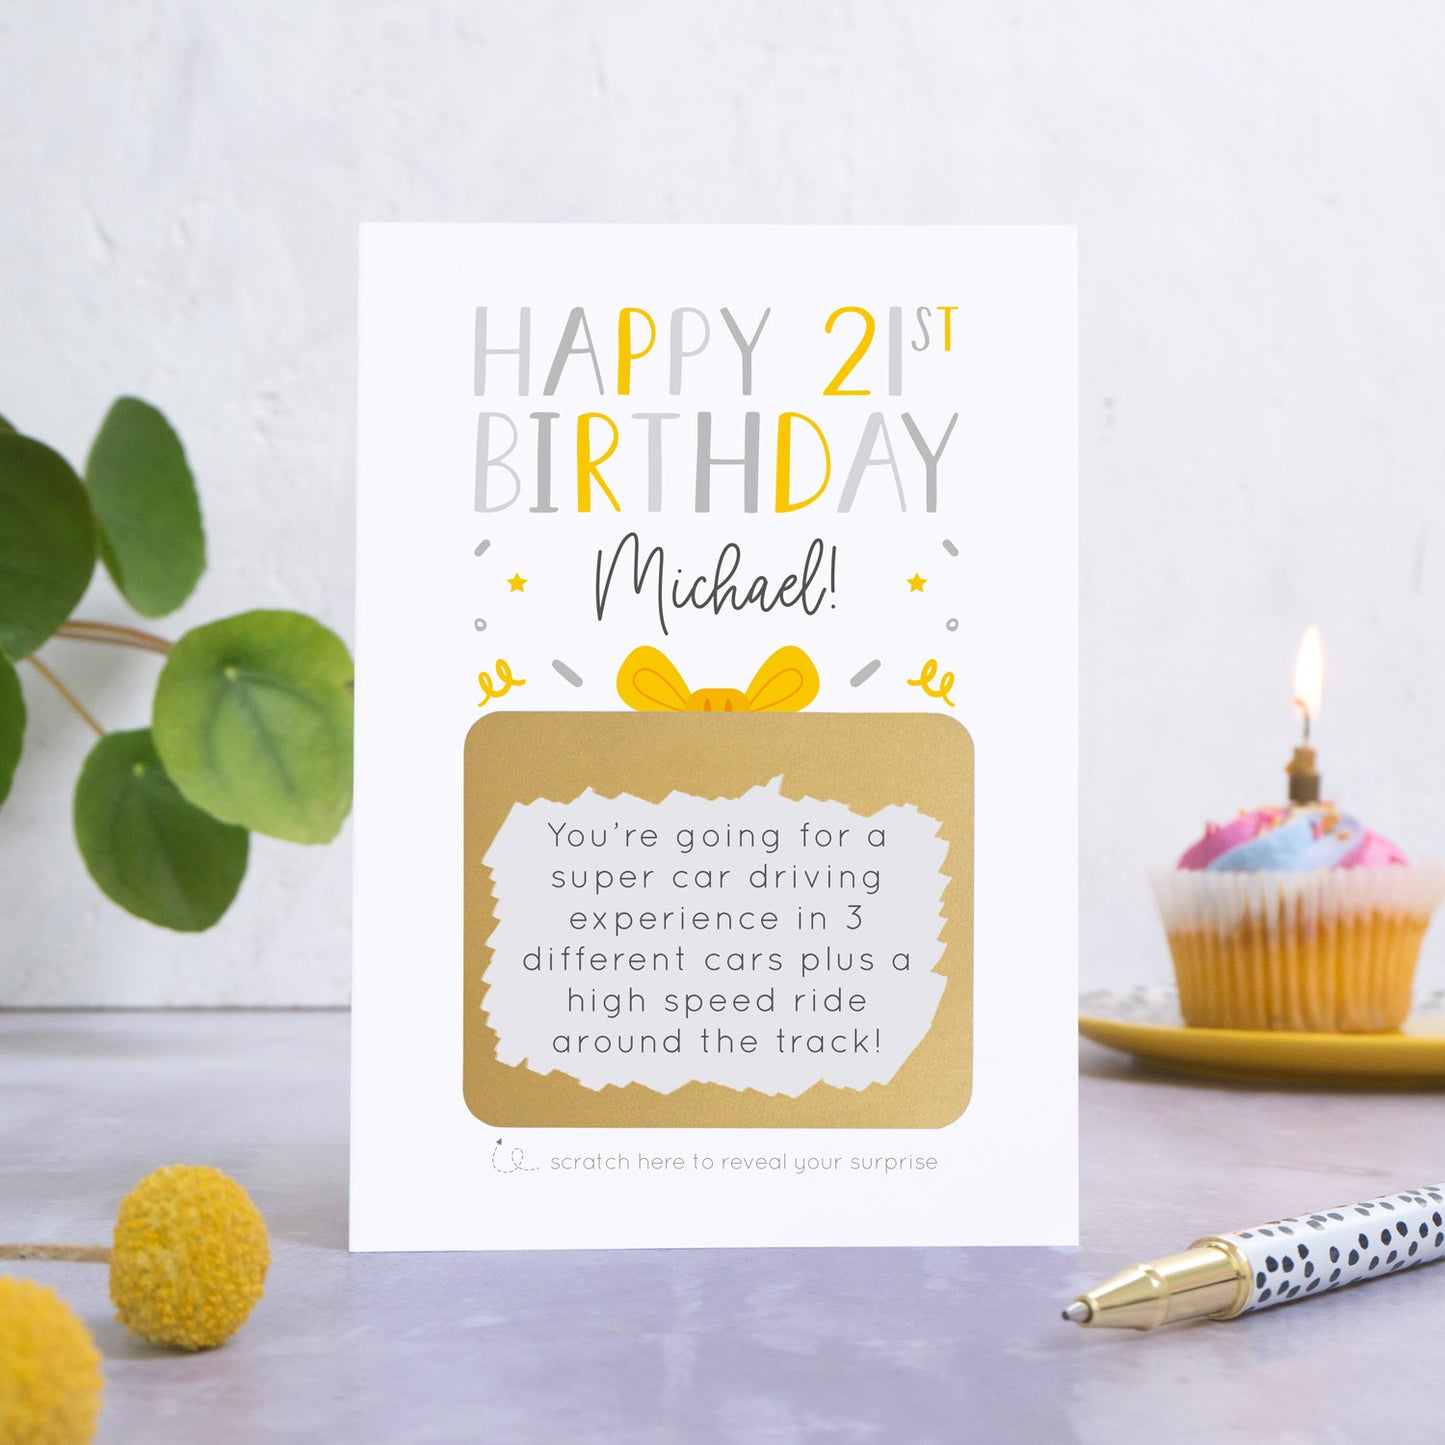 A personalised happy 21st birthday scratch card in grey that has been photographed on a white and grey background. There is foliage and yellow flowers on the left and a cupcake and a pen to the right. The card features the recipients name and a scratch panel that has been scratched off revealing a personalised message.